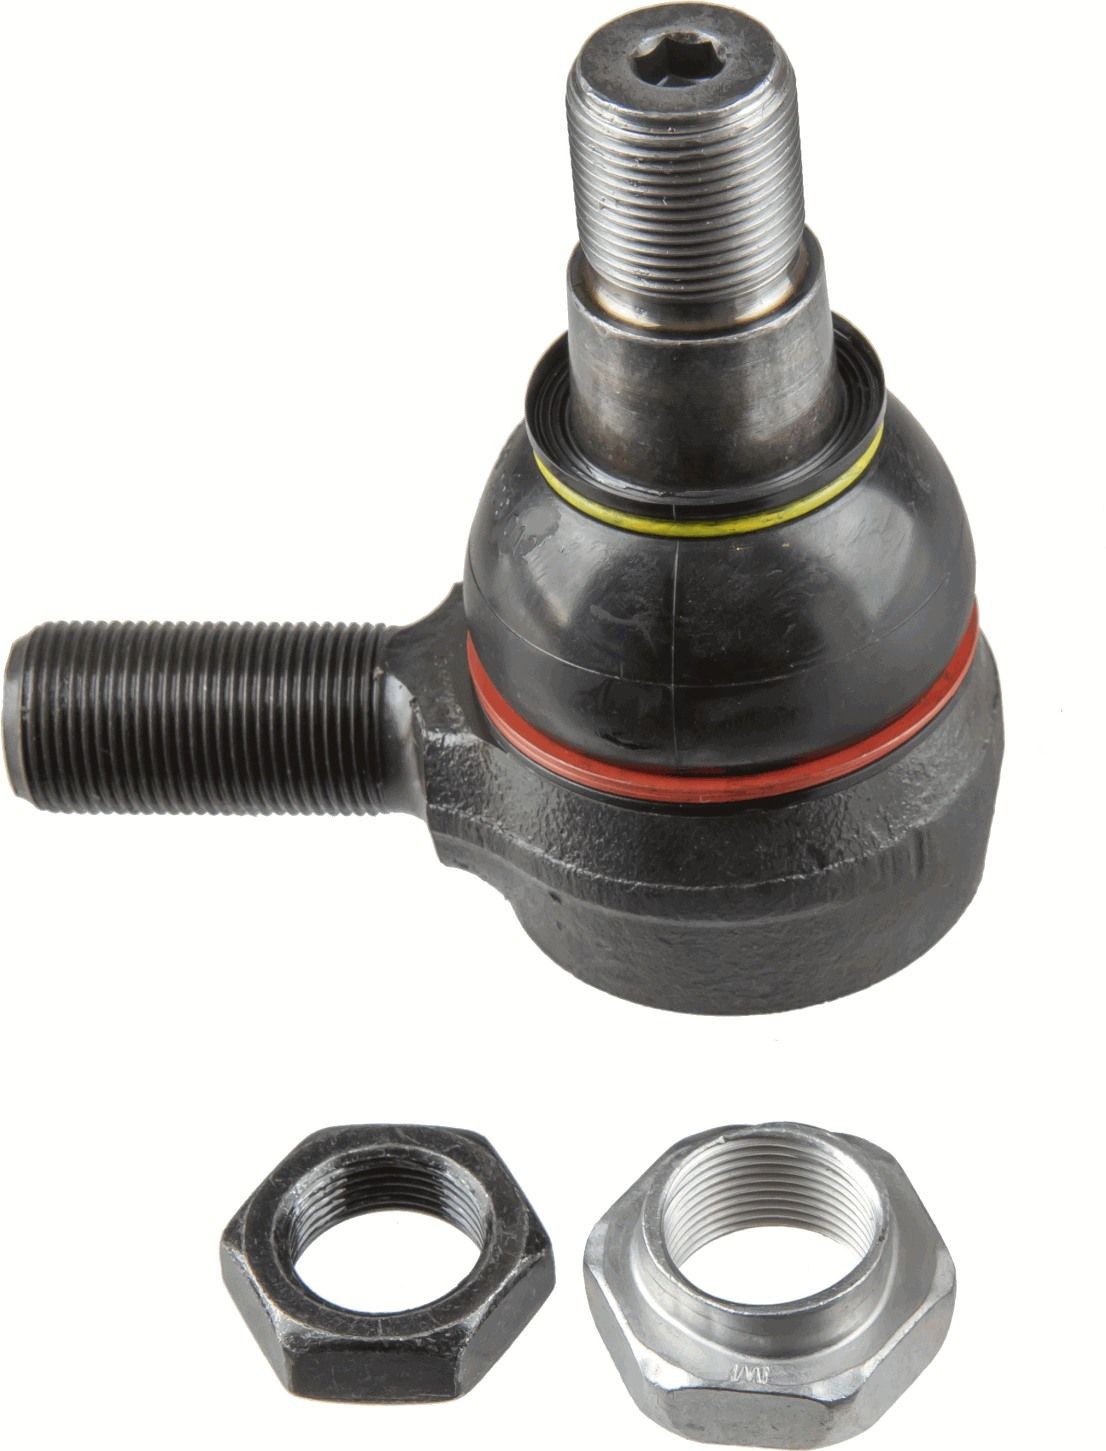 C:30/TH:M22x1,5R/L:80 LEMFÖRDER Cone Size 30 mm, M22x1,5 mm, with accessories Cone Size: 30mm, Thread Type: with right-hand thread Tie rod end 20565 01 buy